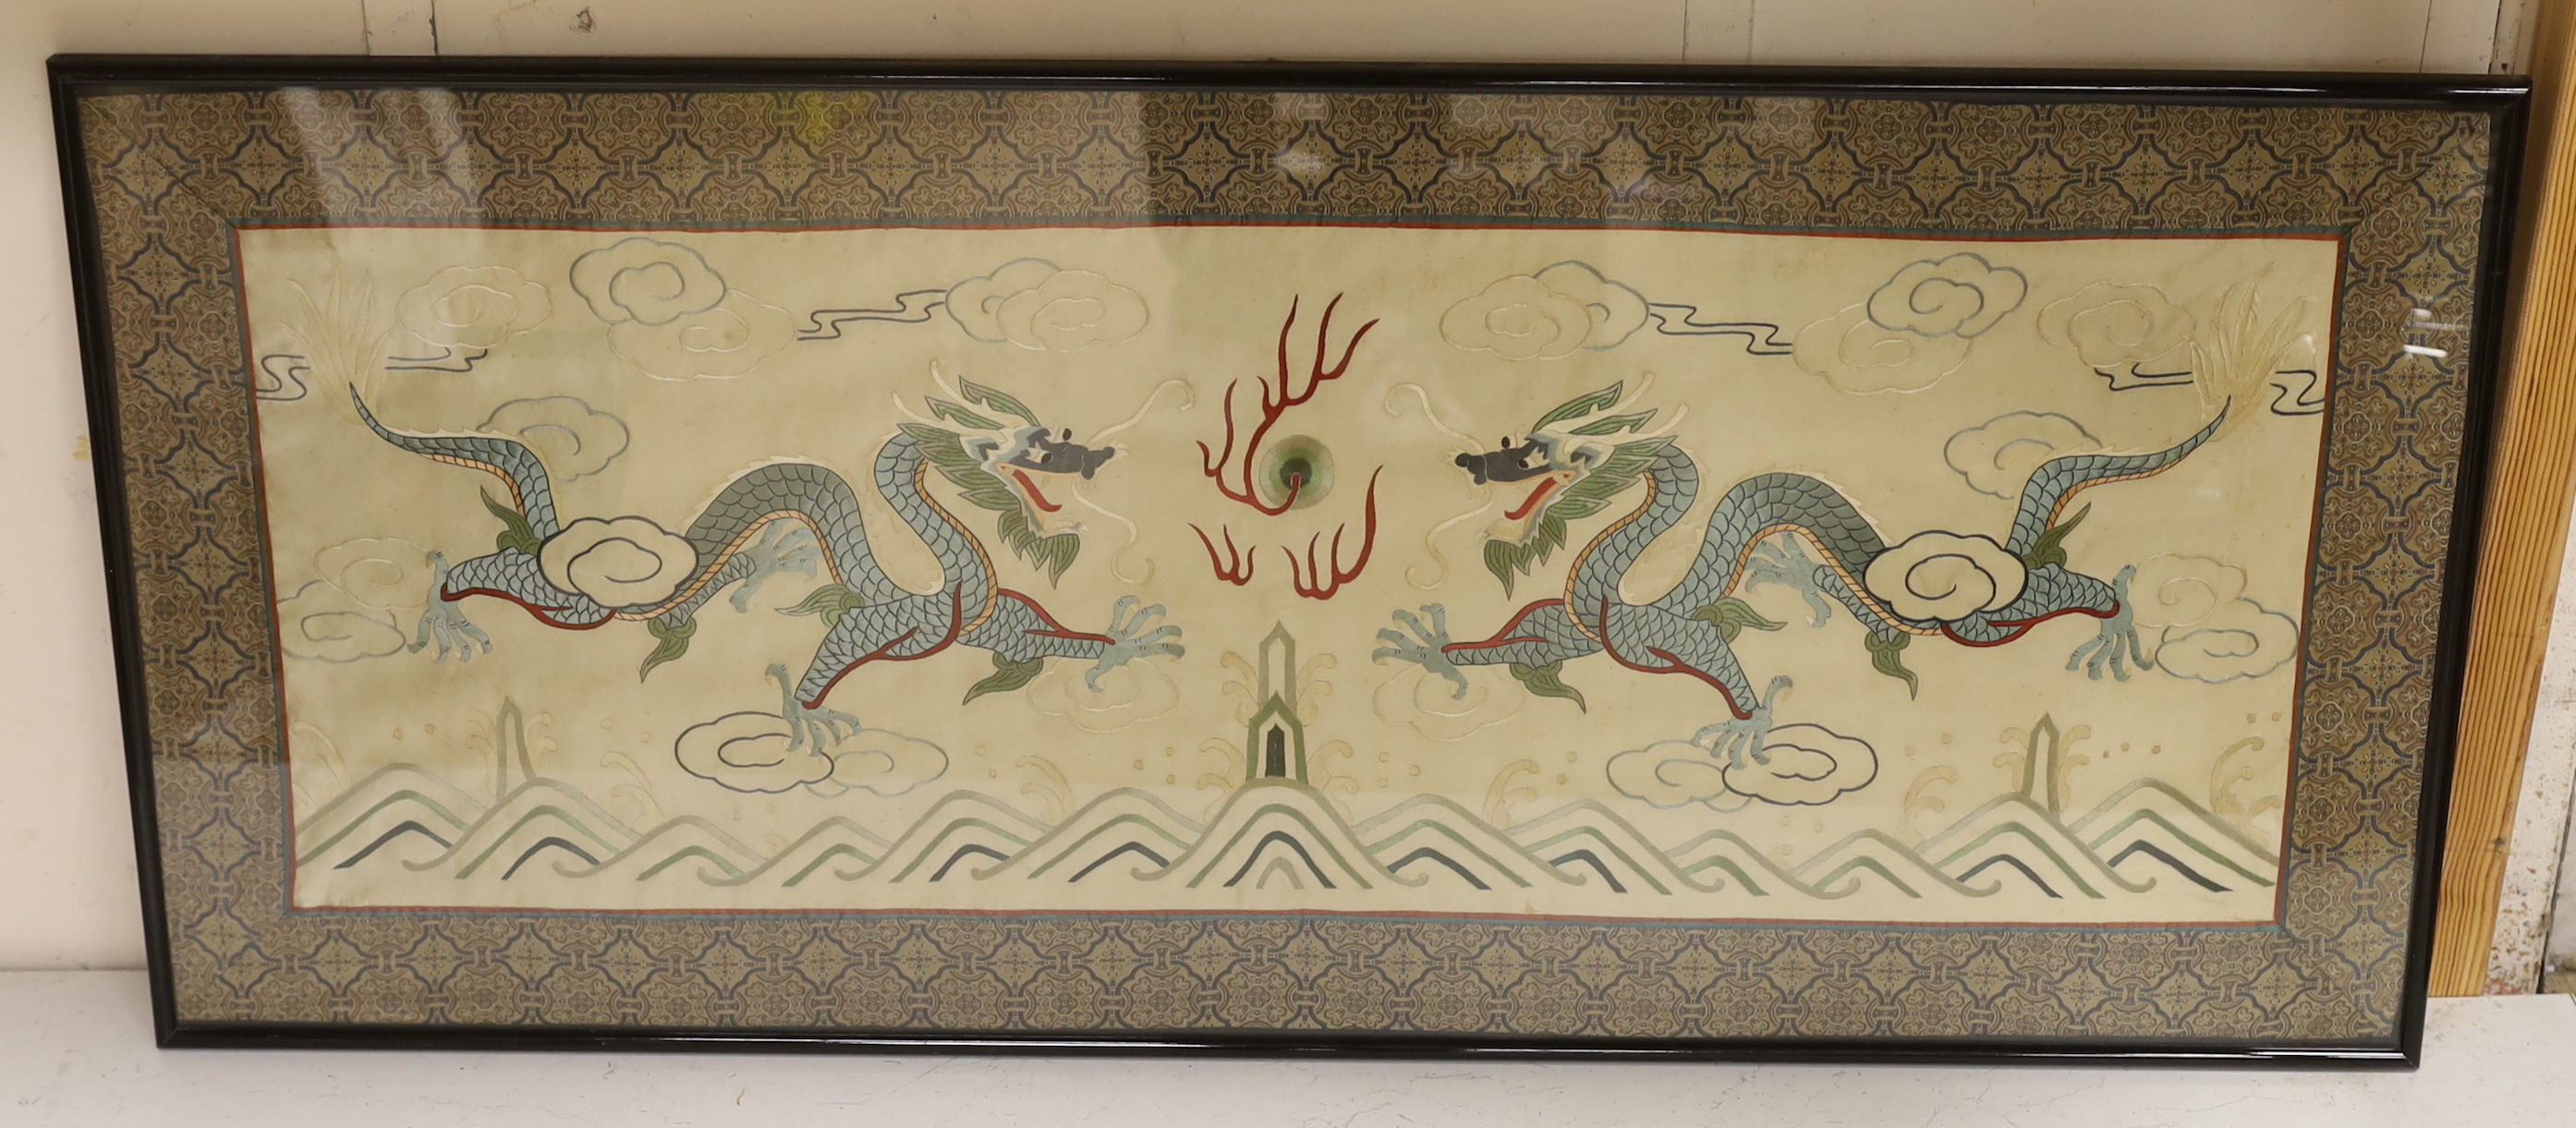 A framed 20th century Chinese silk embroidered 'dragon’ panel, with flaming pearl design, bordered